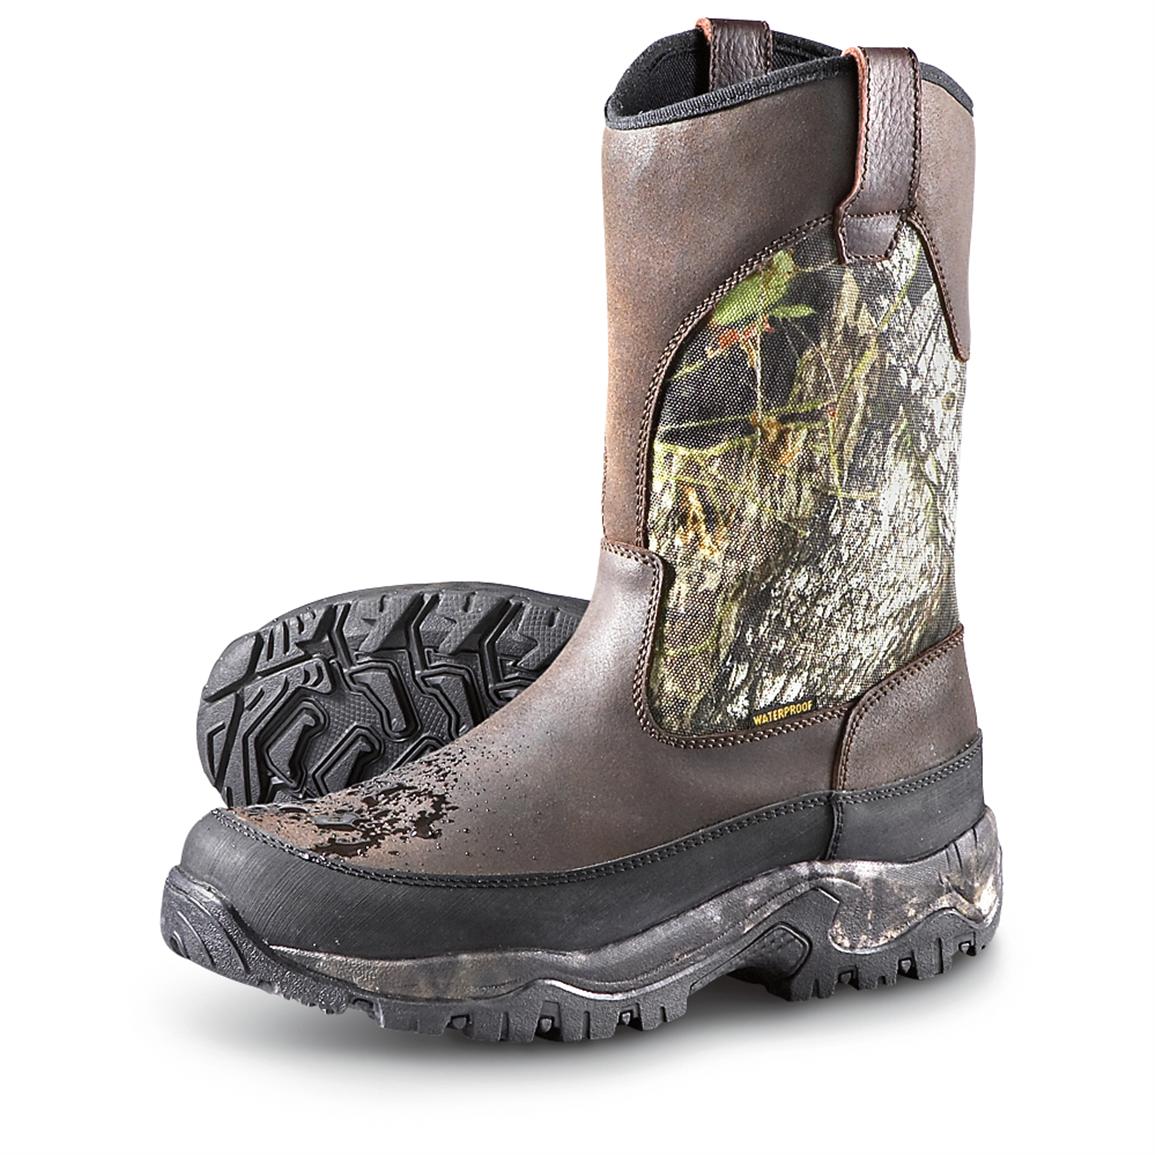 Guide Gear Men's Hunting Pull-On Boots, Insulated, Waterproof ...